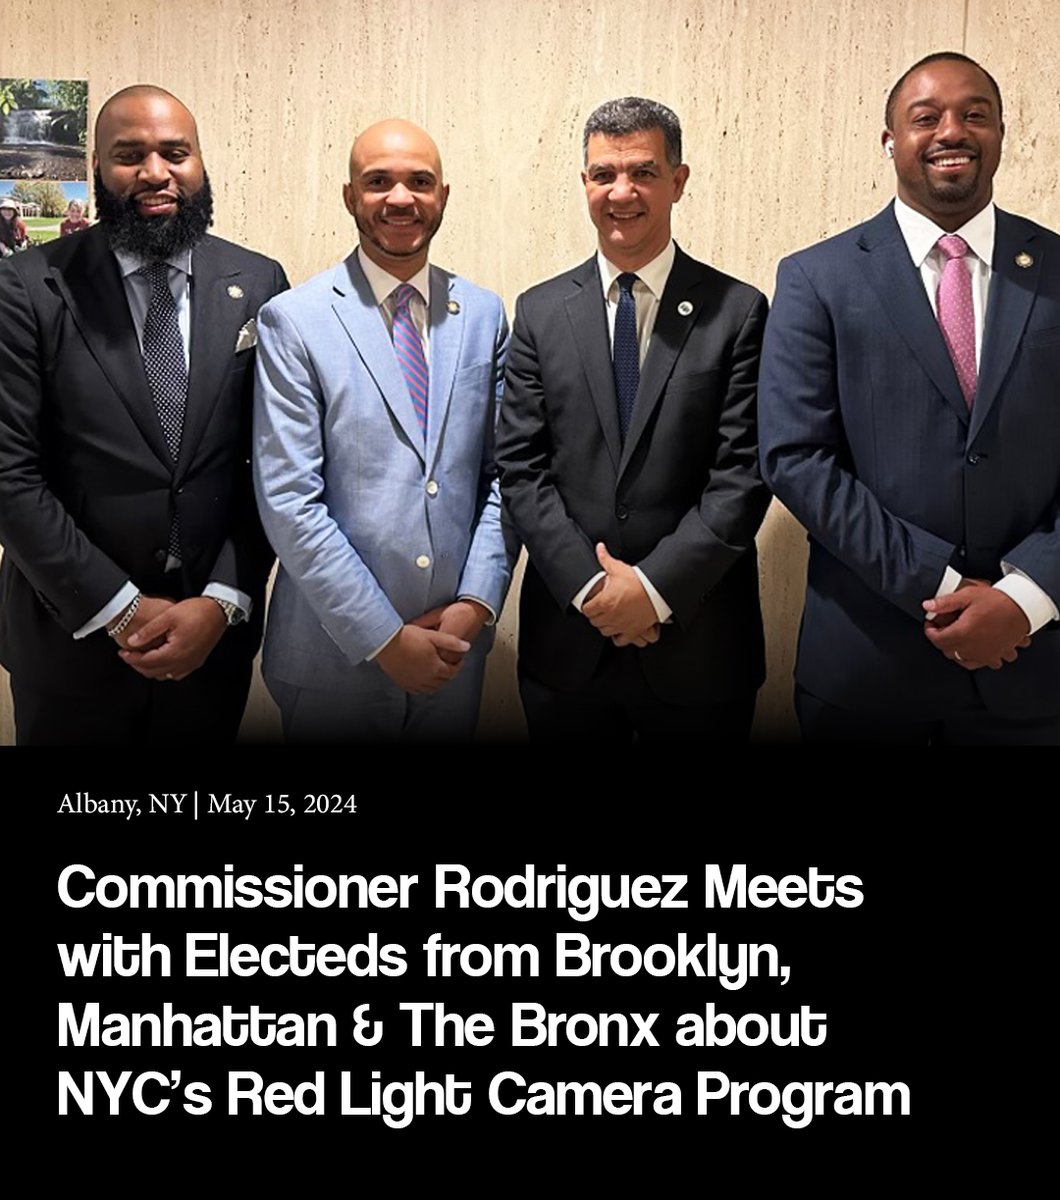 The data is clear: red light cameras are effective and save lives. Today, Commissioner Rodriguez met with @NYAMCunningham, @AMDeLosSantos72 and @Dais77NY in Albany to push for the renewal and expansion of NYC’s Red Light Camera program.